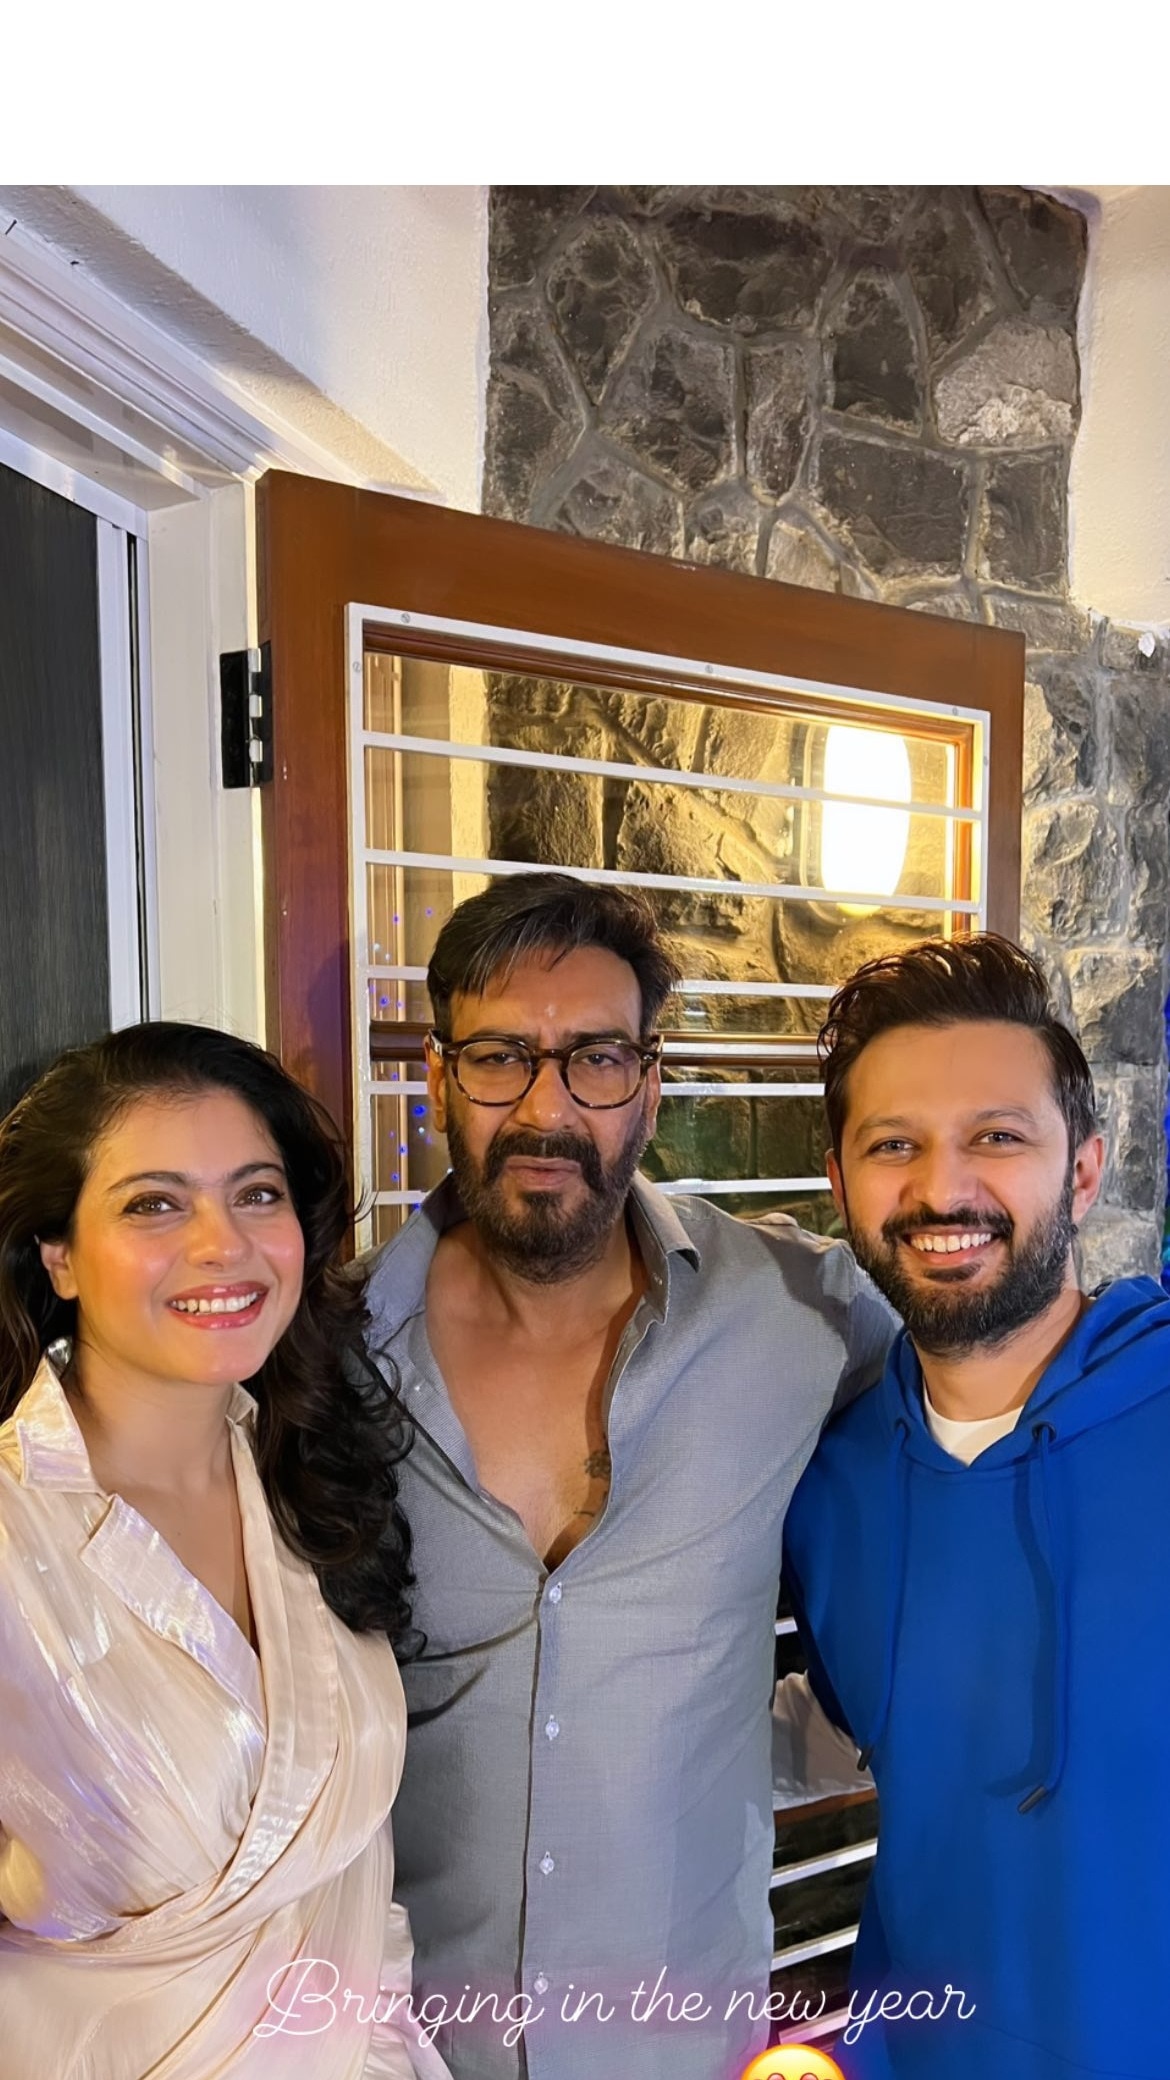 Kajol and Ajay Devgn at a New Year party.